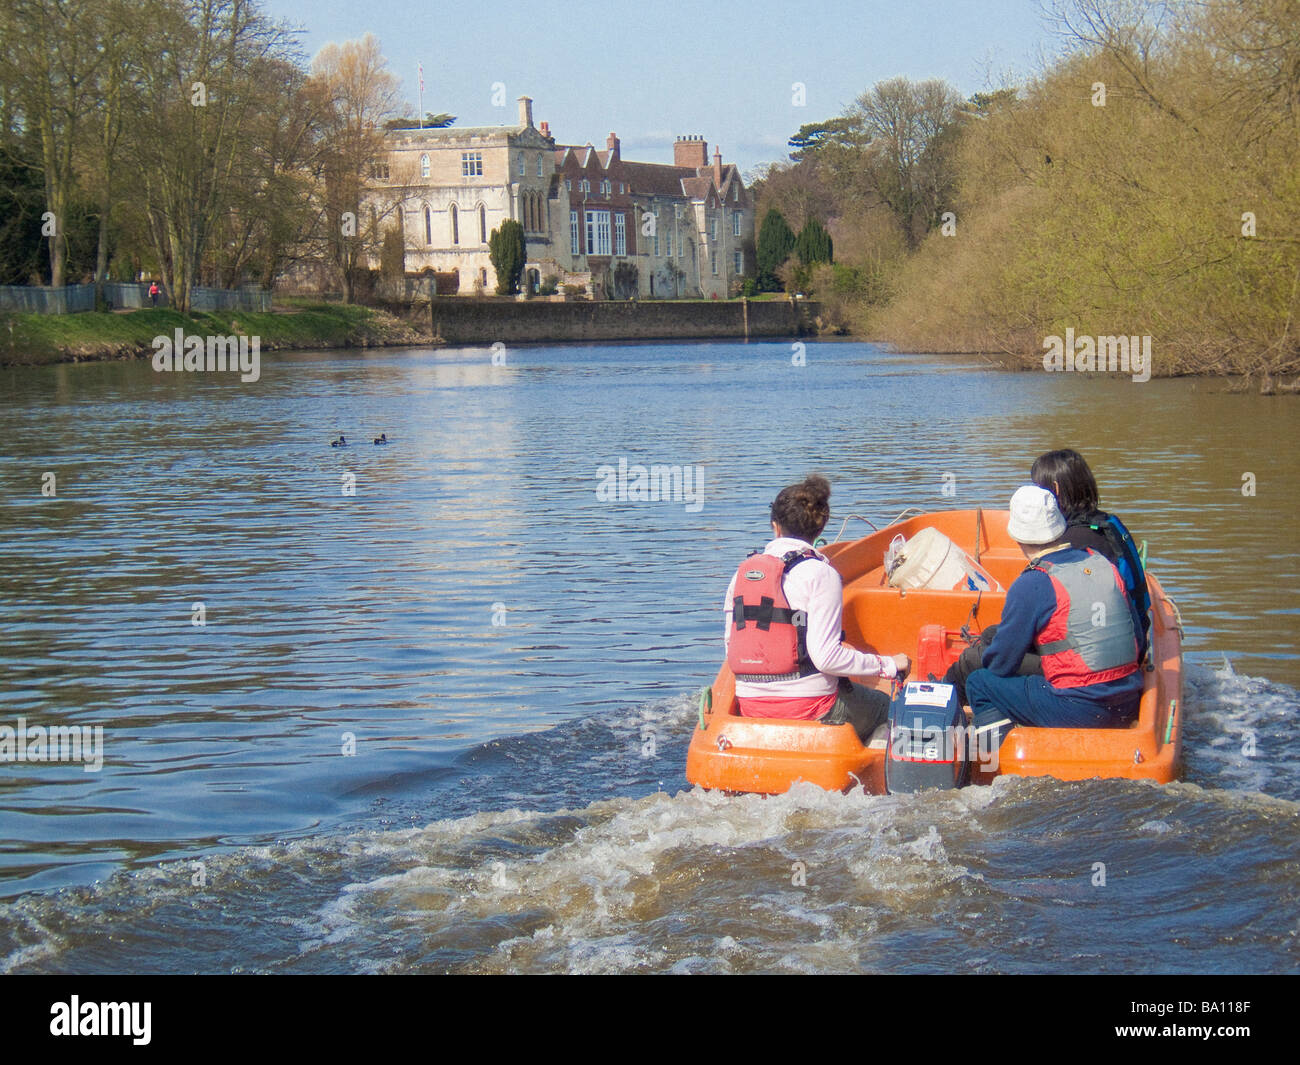 Orange plastic moulded boat with 3 people on board, on the river Ouse in York with Bishopthorpe Palace in the distance. Stock Photo